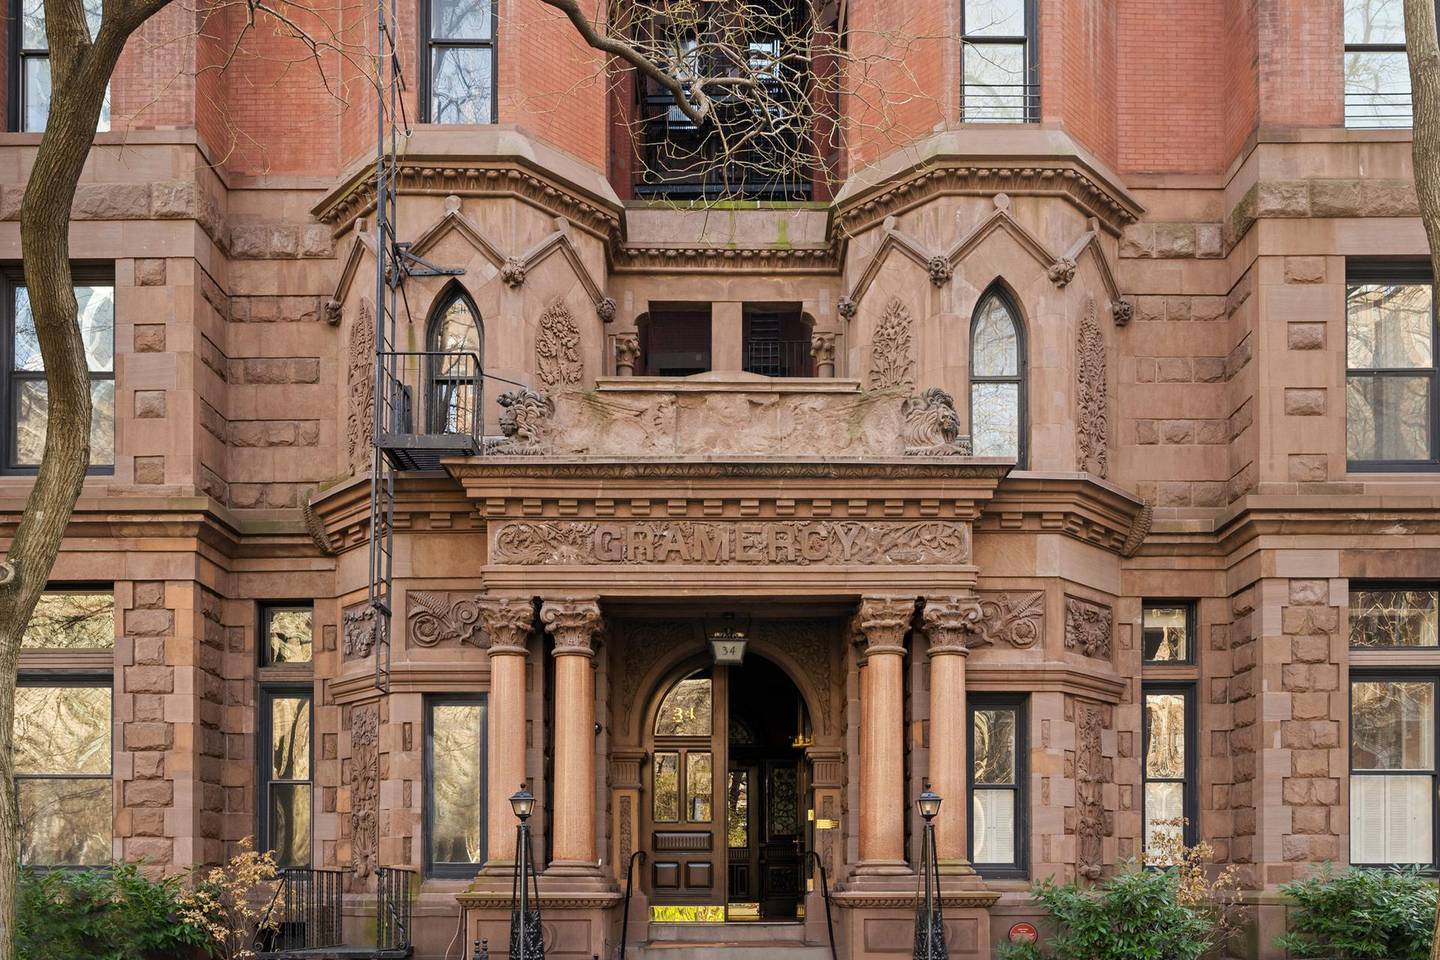 34, Gramercy Park was constructed in 1883. Courtesy Yale Wagner / Sotheby’s International Realty